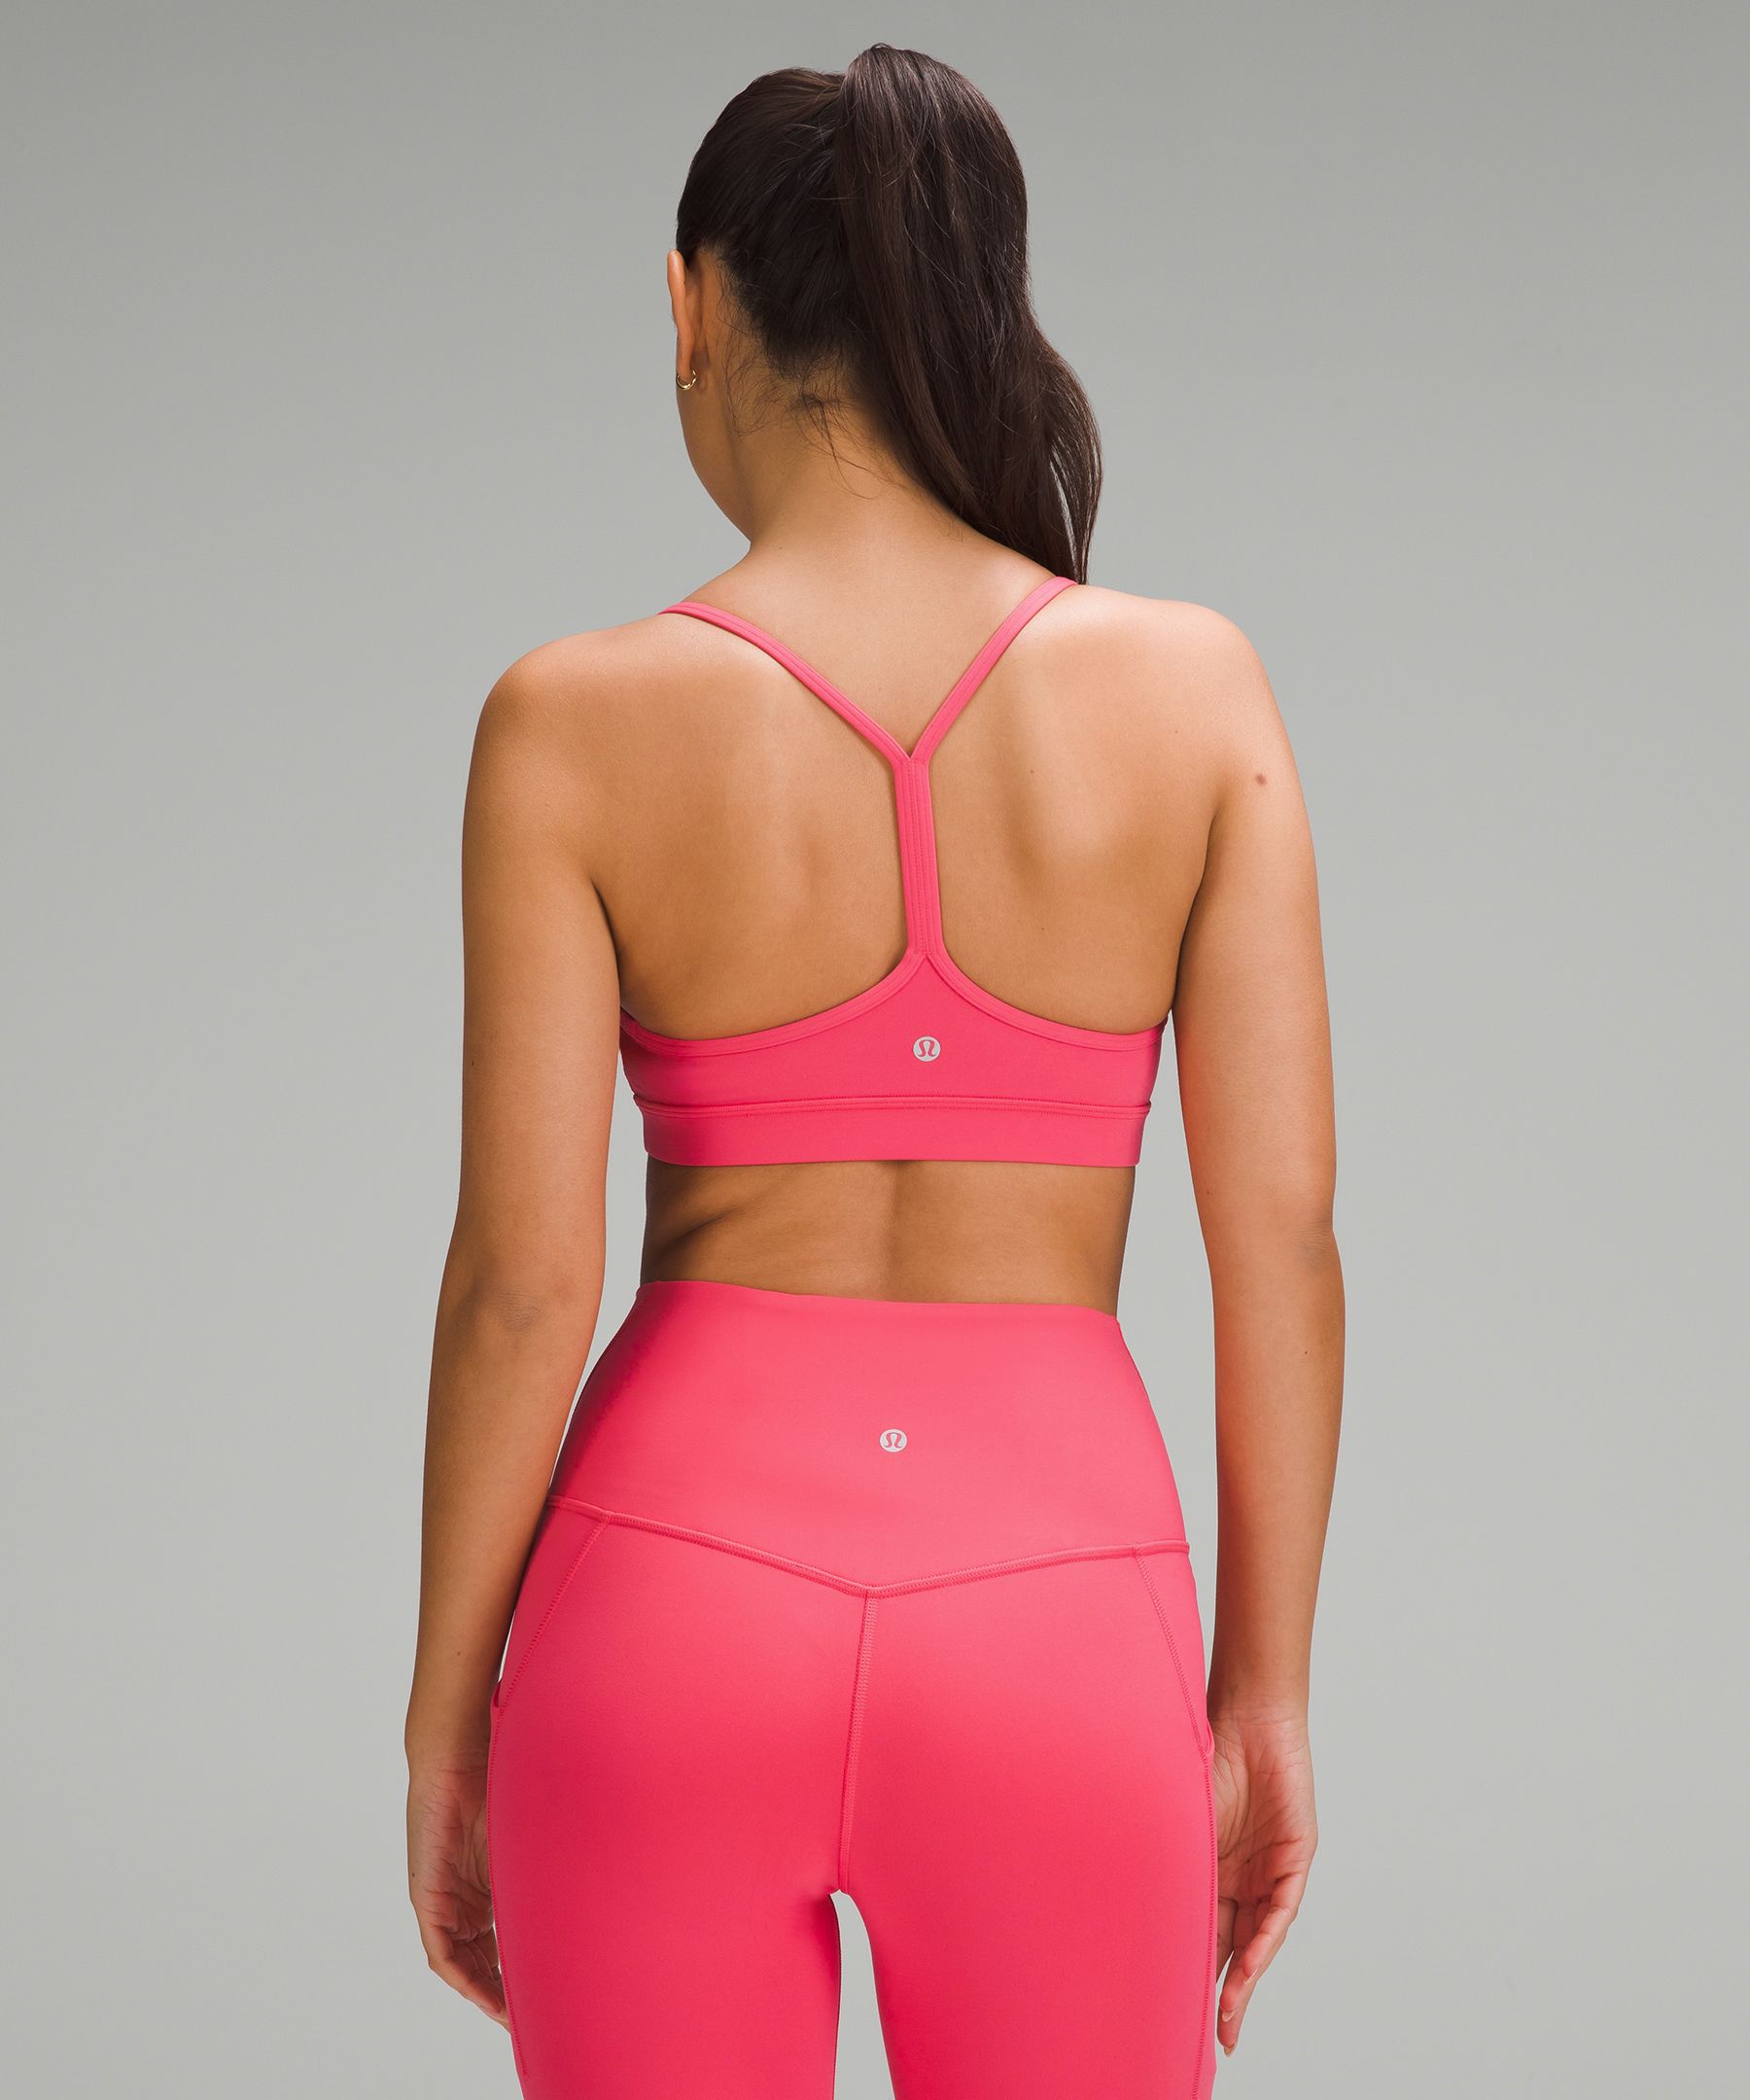 Lululemon Box it Out leggings and bra set size 4 oxblood red GUC - $46 (64%  Off Retail) - From Shannon